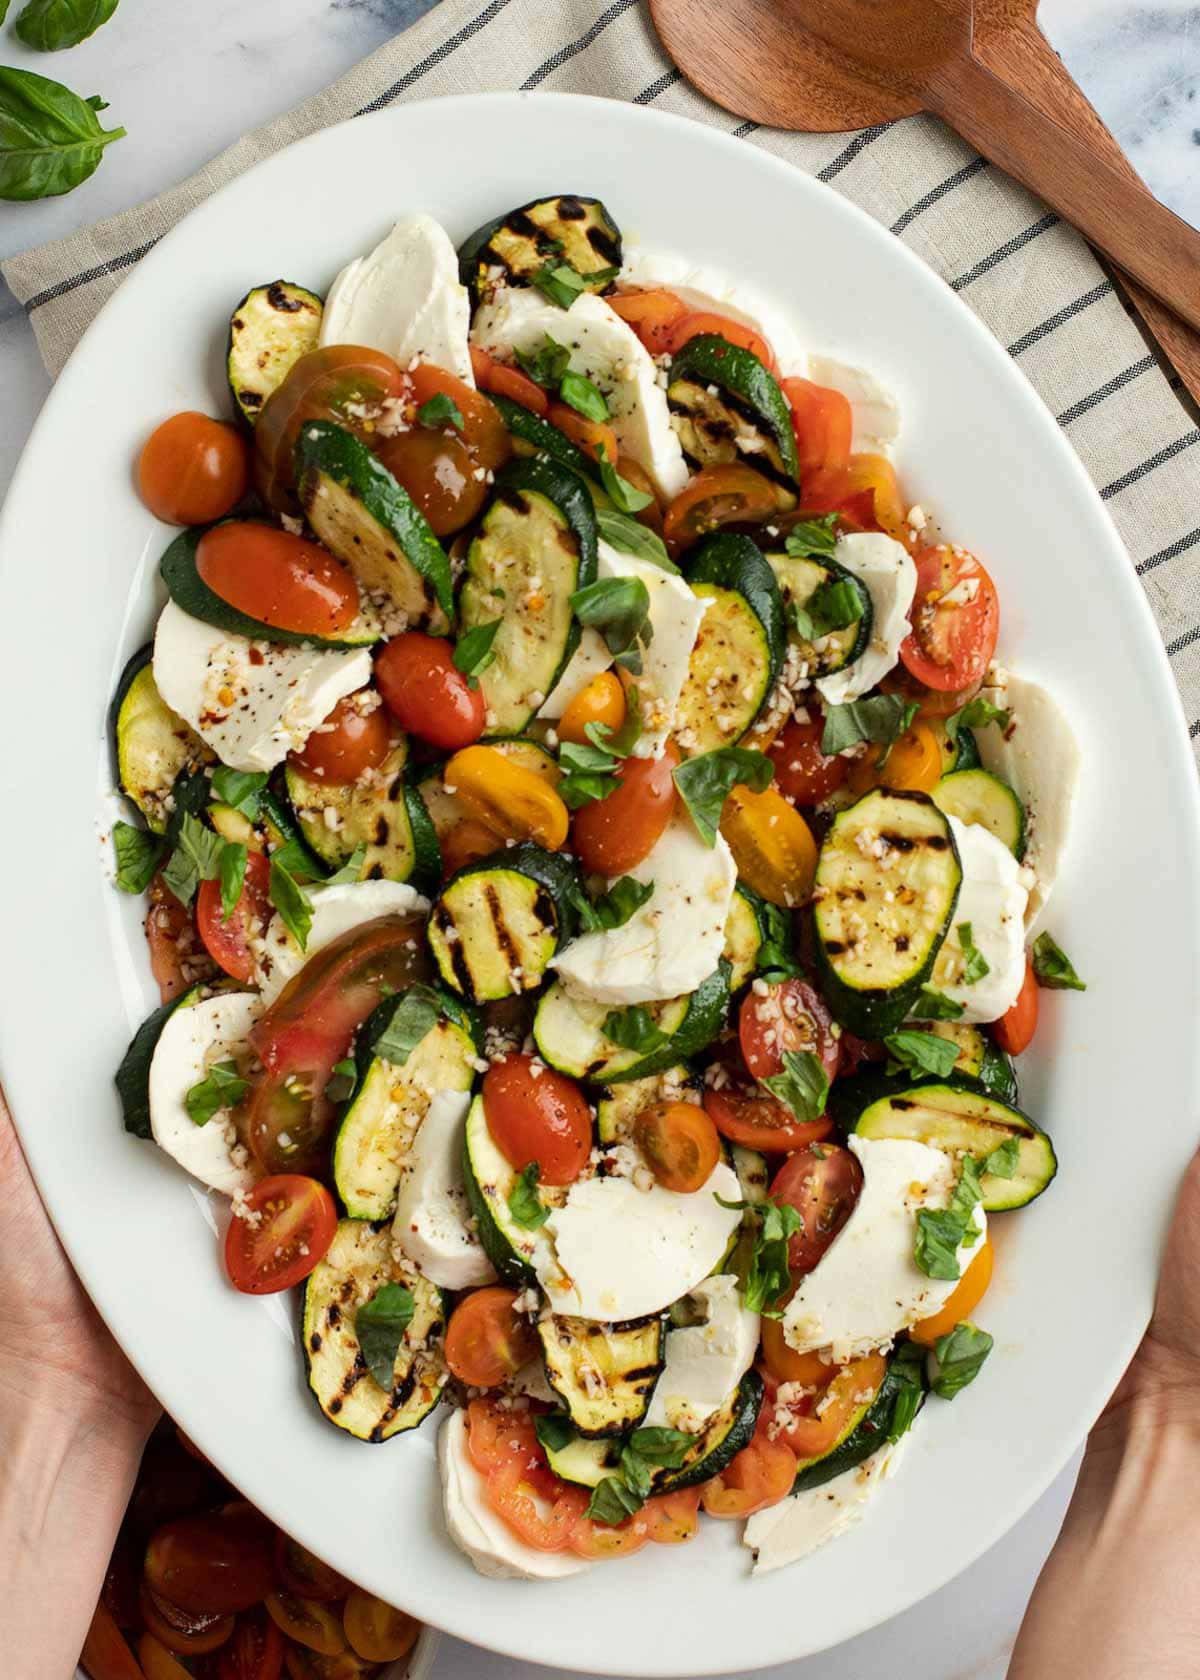 This Grilled Zucchini Salad with a homemade red wine vinaigrette will be your repeat meal of the summer! This healthy recipe is ready in under 30 minutes and loaded with fresh mozzarella and tender veggies.